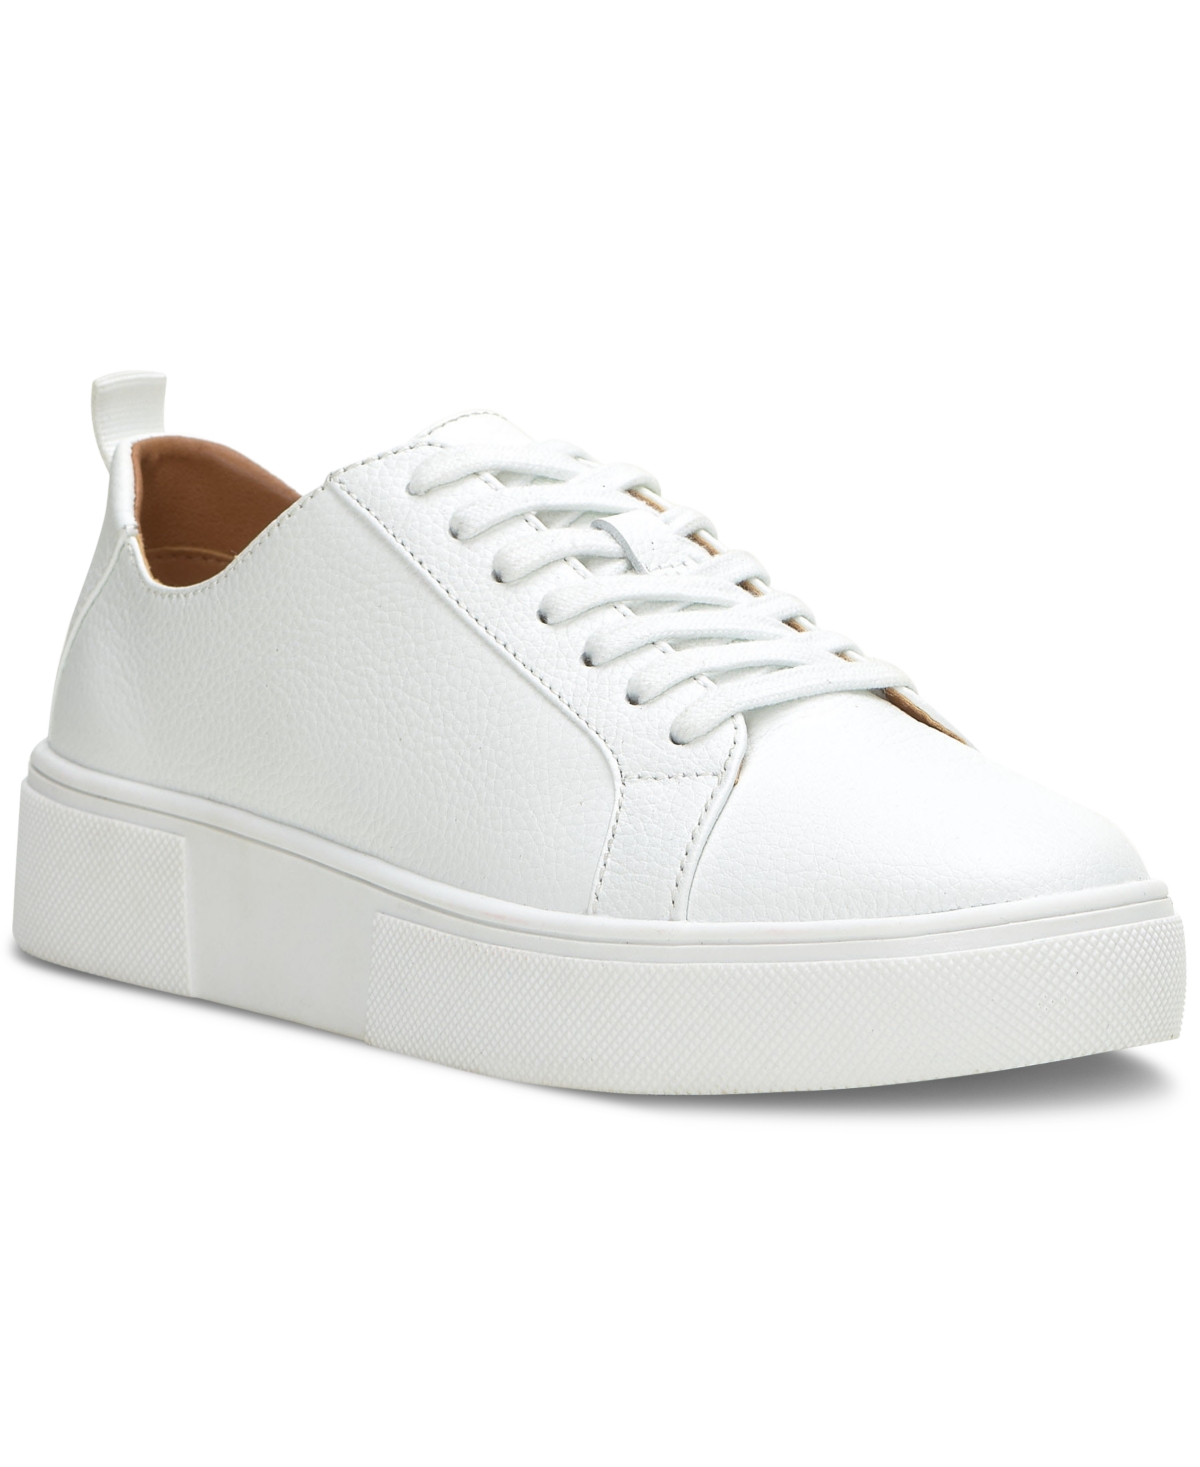 Women's Zamilio Lace-Up Low-Top Leather Sneakers - White Leather